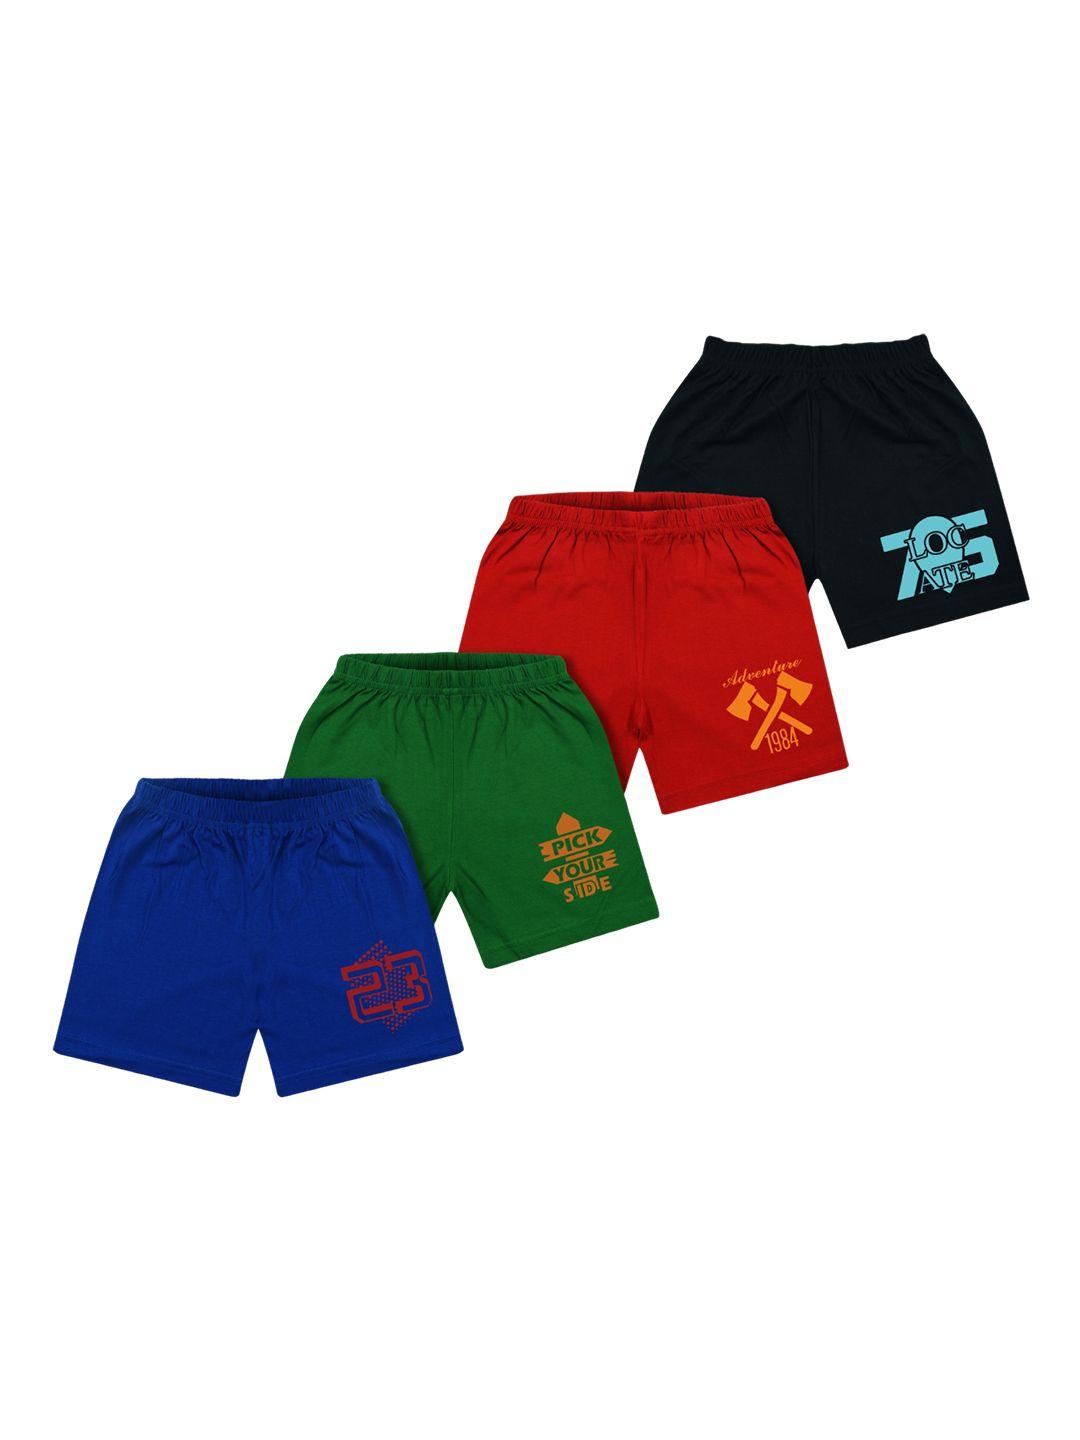 silver fang boys pack of 4 cotton shorts